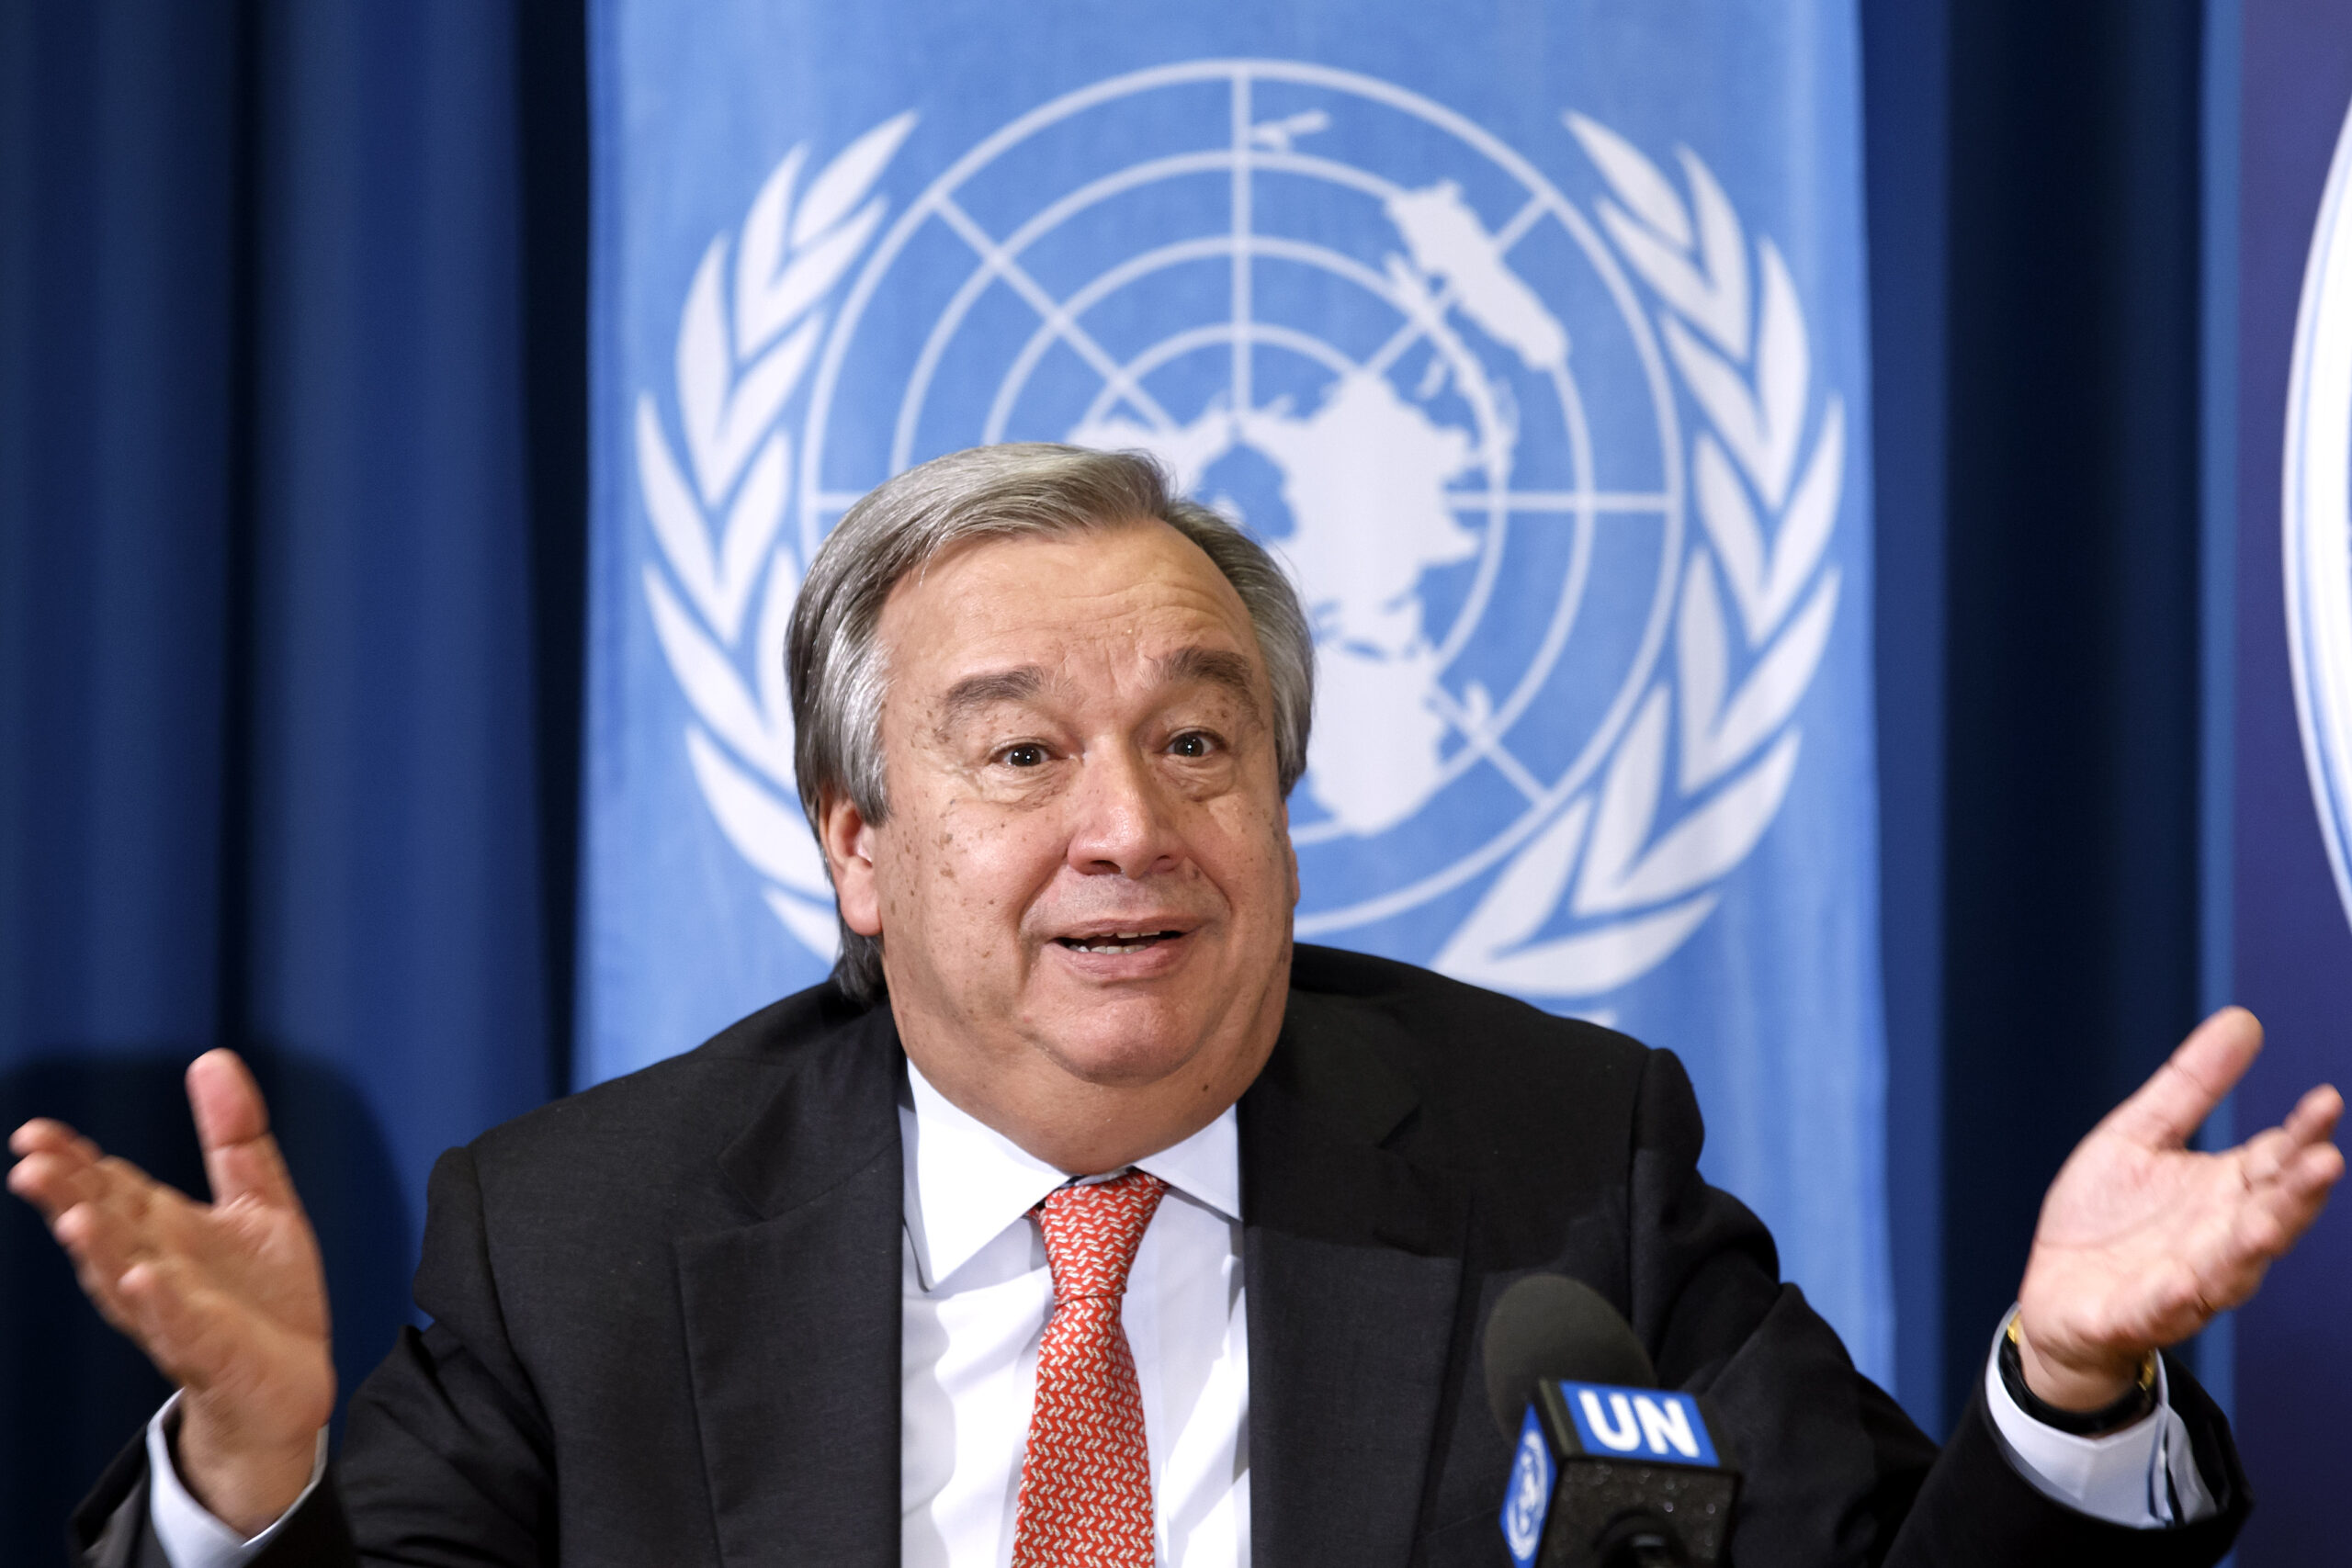 COVID-19: ‘Let’s Make Recovery Our Resolution,’ UN Chief Says In New Year Message